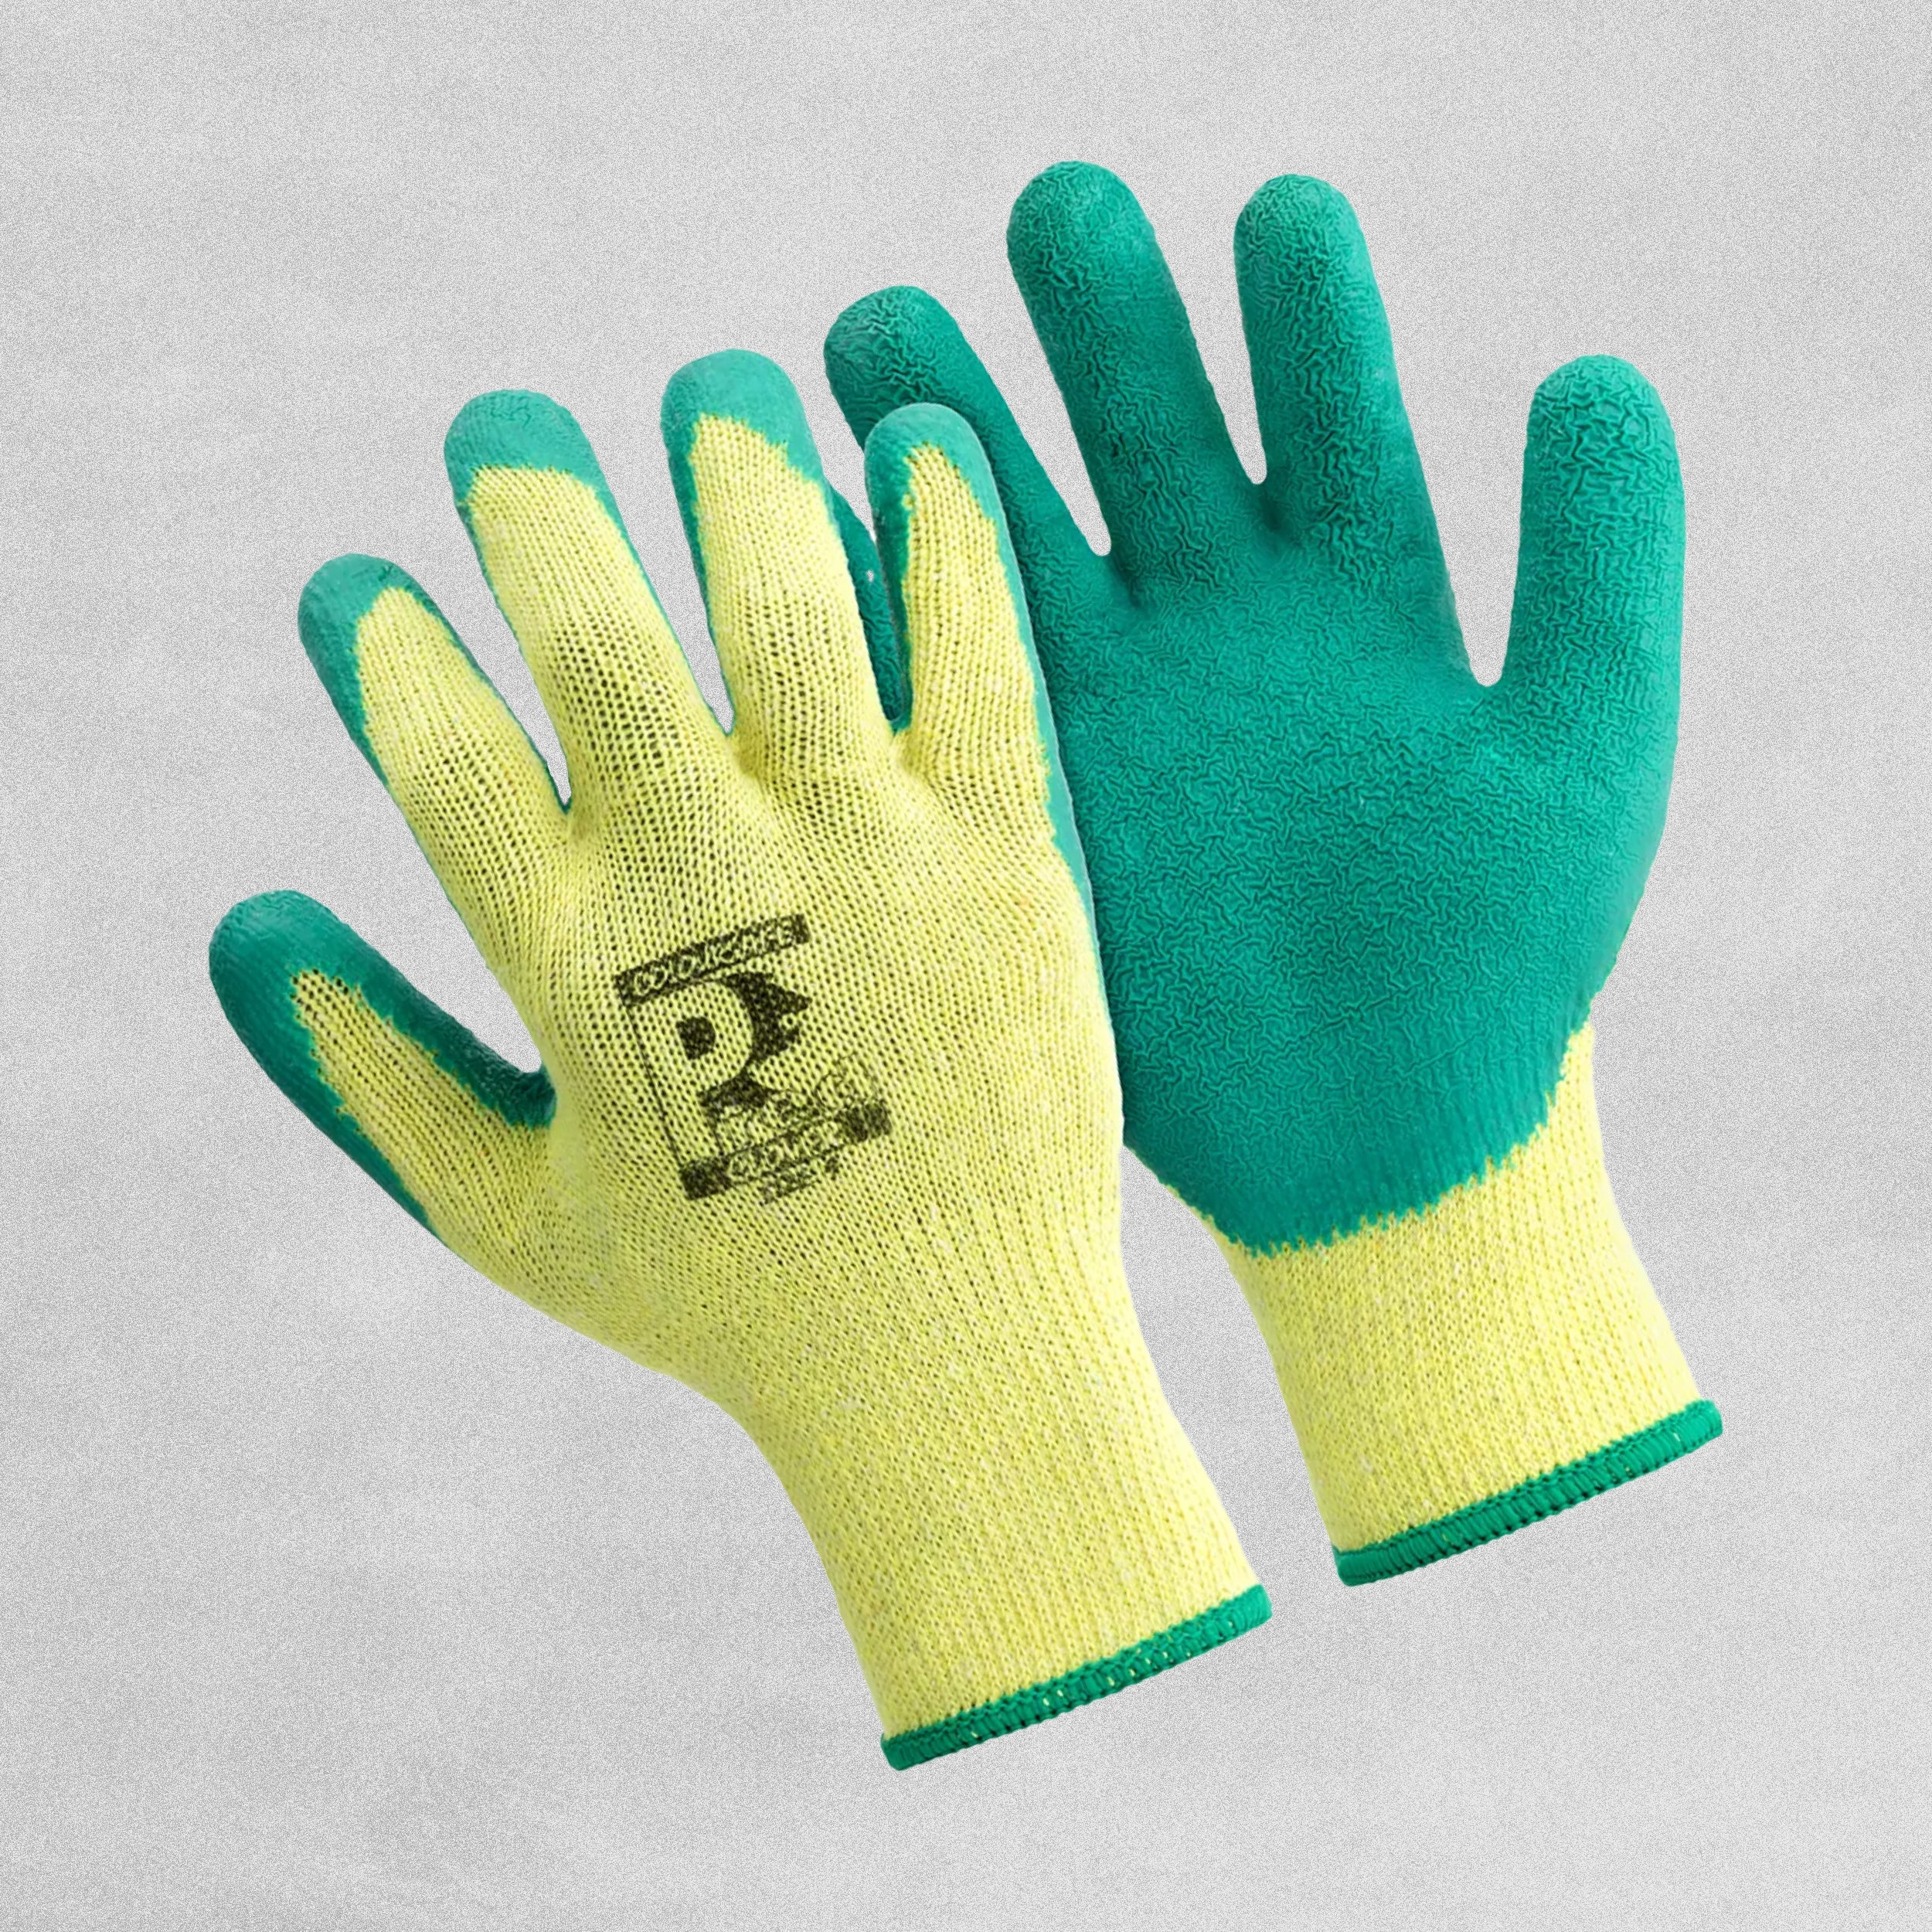 Multi Purpose Nitrile Gloves - 4 Sizes Available